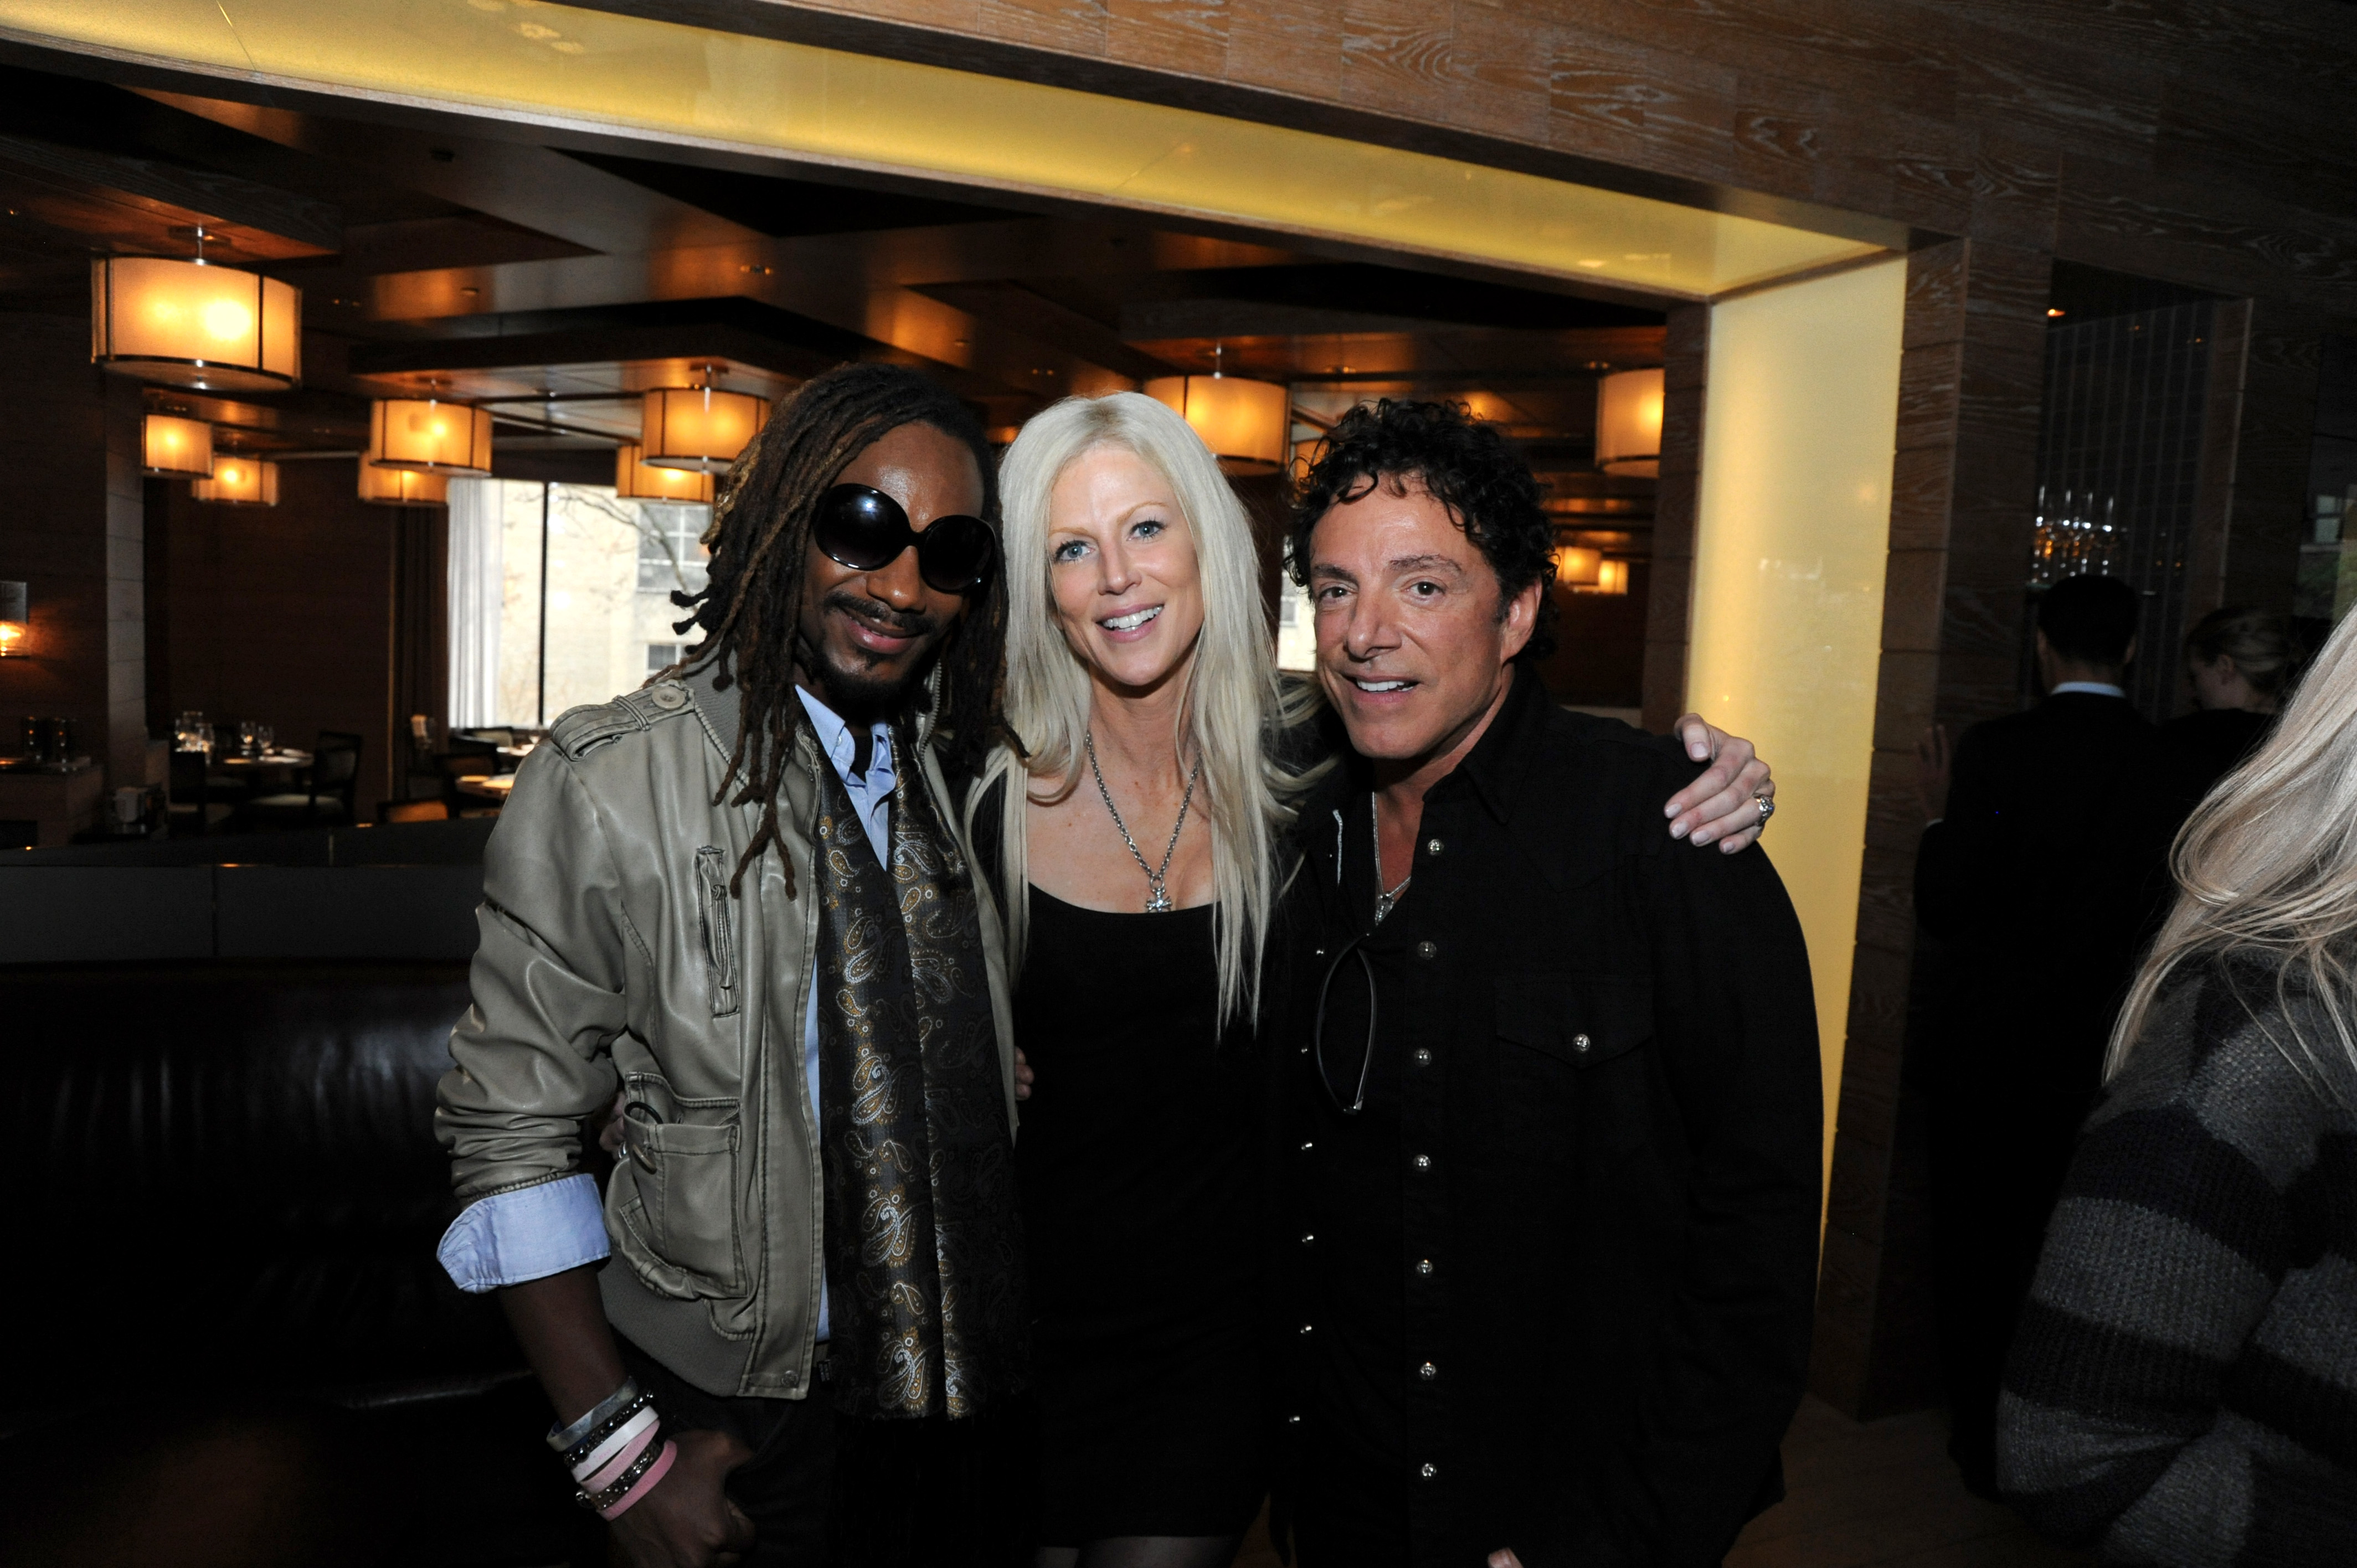 Howard Nelson Cromwell with clients Bravo's Real Housewives starlet Michaele Salahi & Journey's Neal Schon. Howard had the pleasure of hosting a private Thanksgiving reception for Neal Schon & Michaele Salahi, their family, friends &#